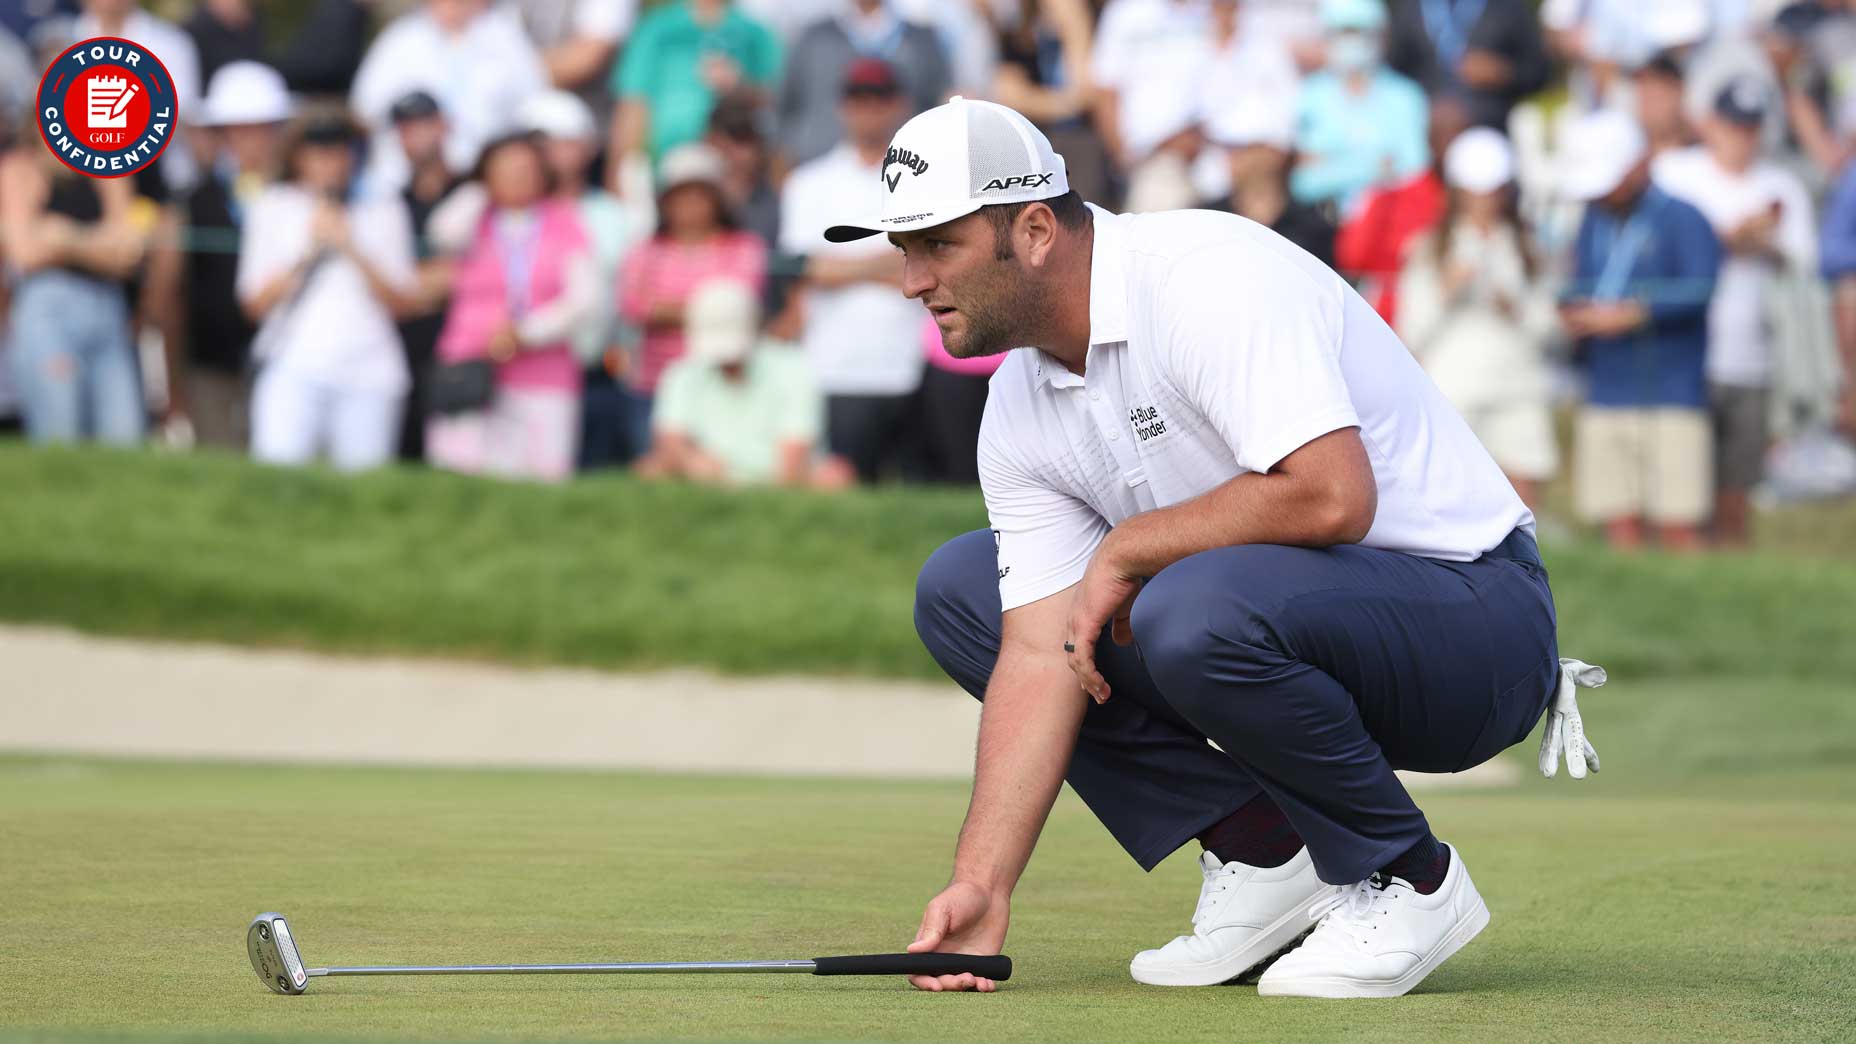 Tour Confidential: Who are you picking to win the US Open?